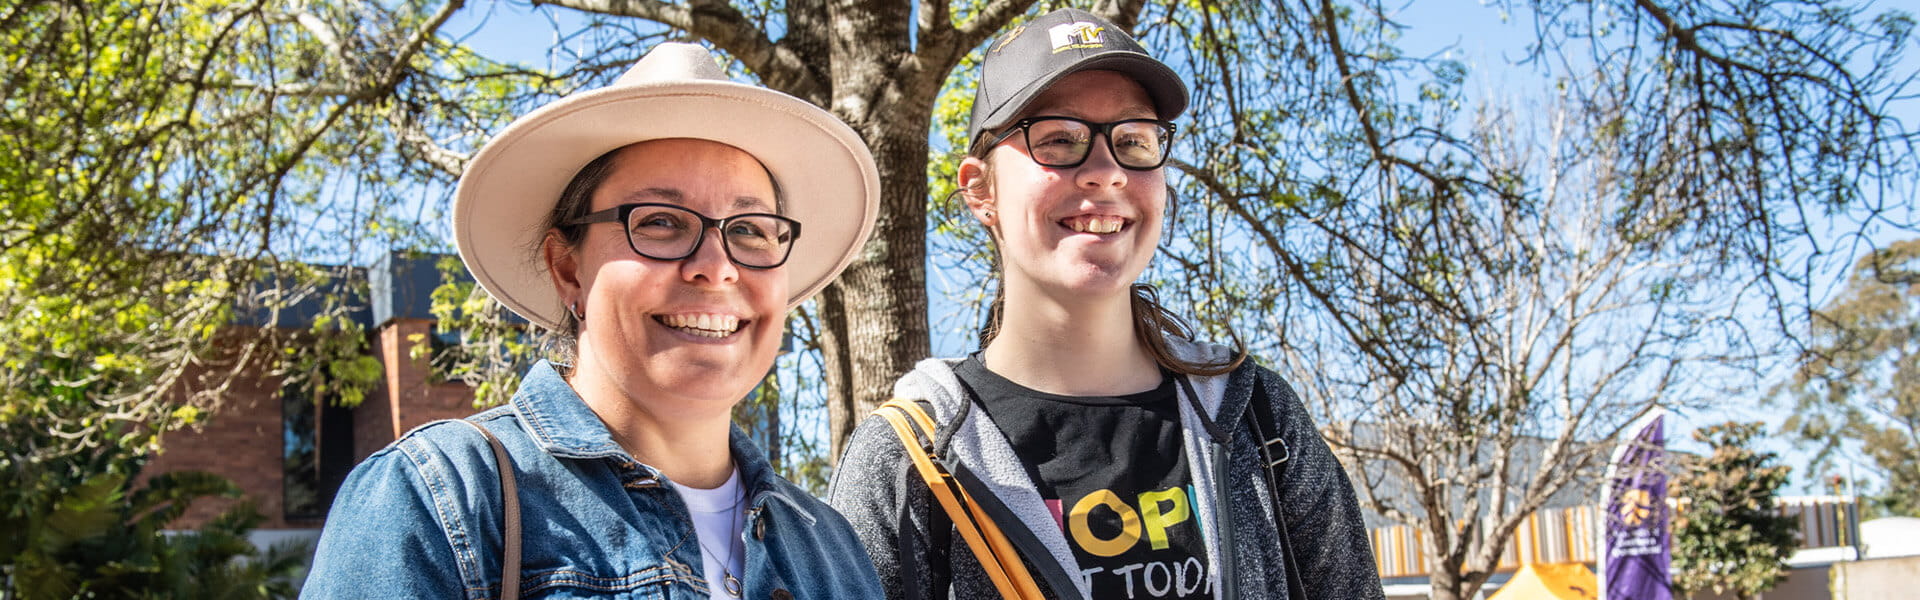 Two individuals smiling outdoors, wearing glasses and hats. Trees and a building are visible in the background on a sunny day.